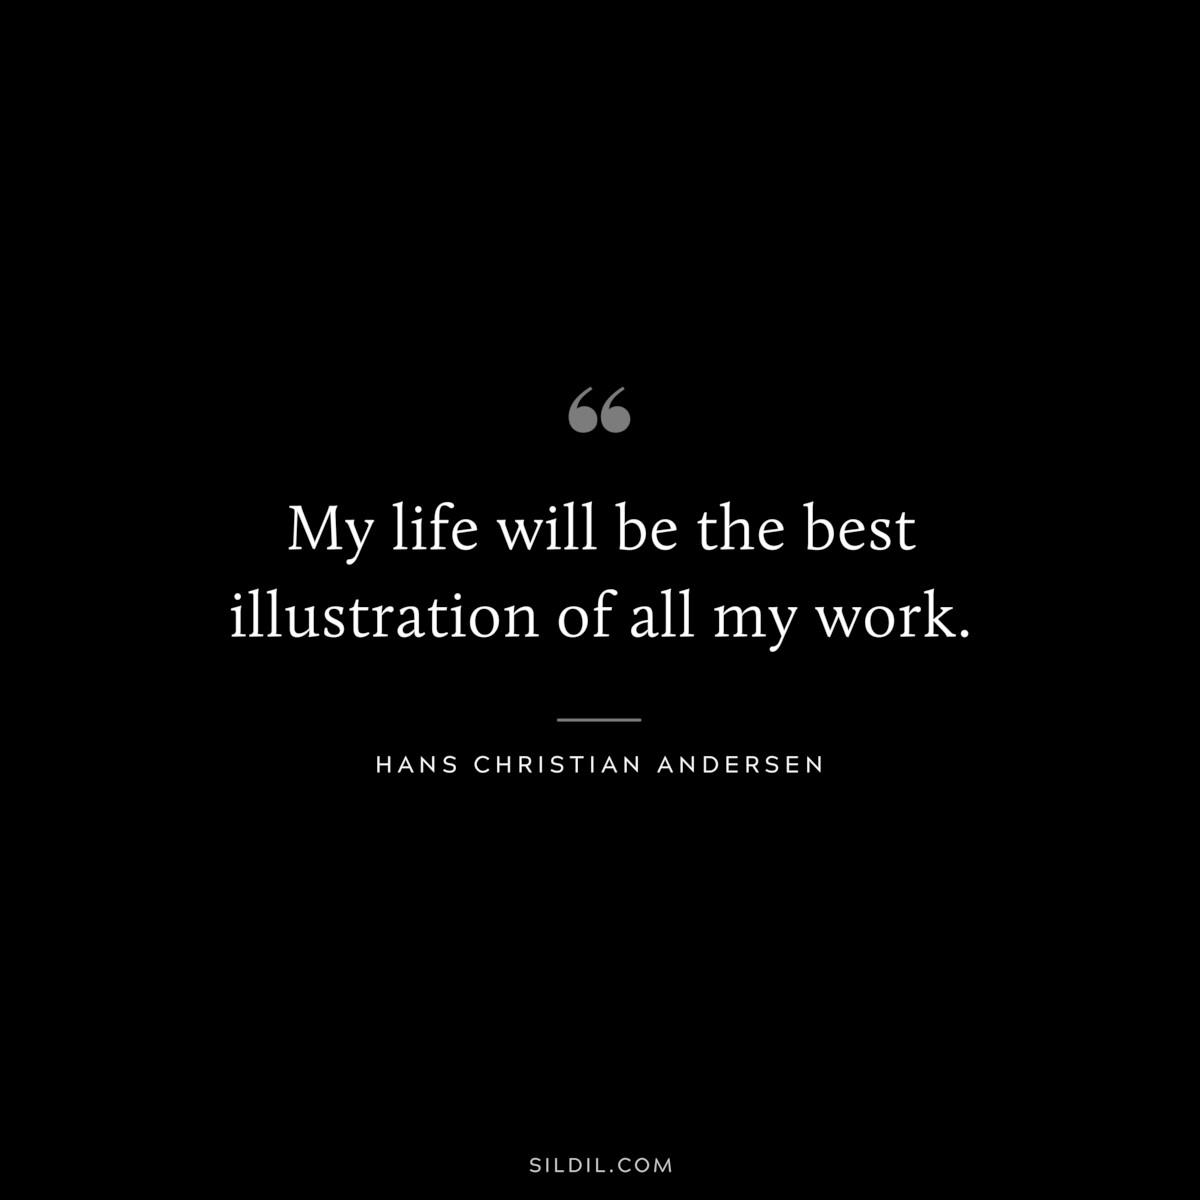 My life will be the best illustration of all my work. ― Hans Christian Andersen